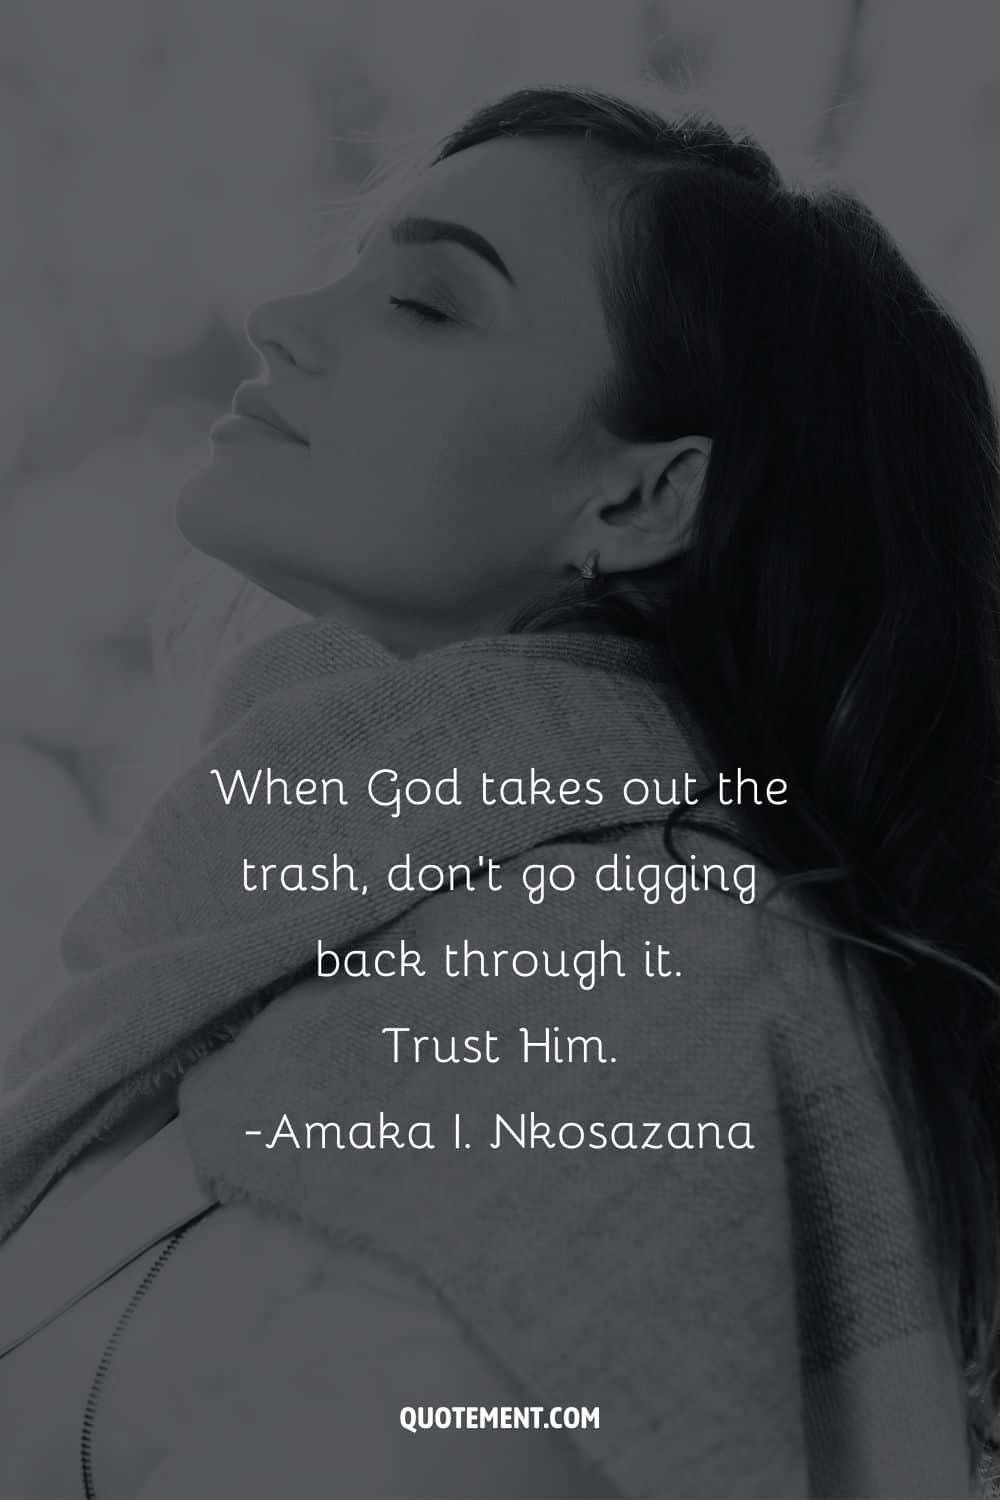 When God takes out the trash, don't go digging back through it